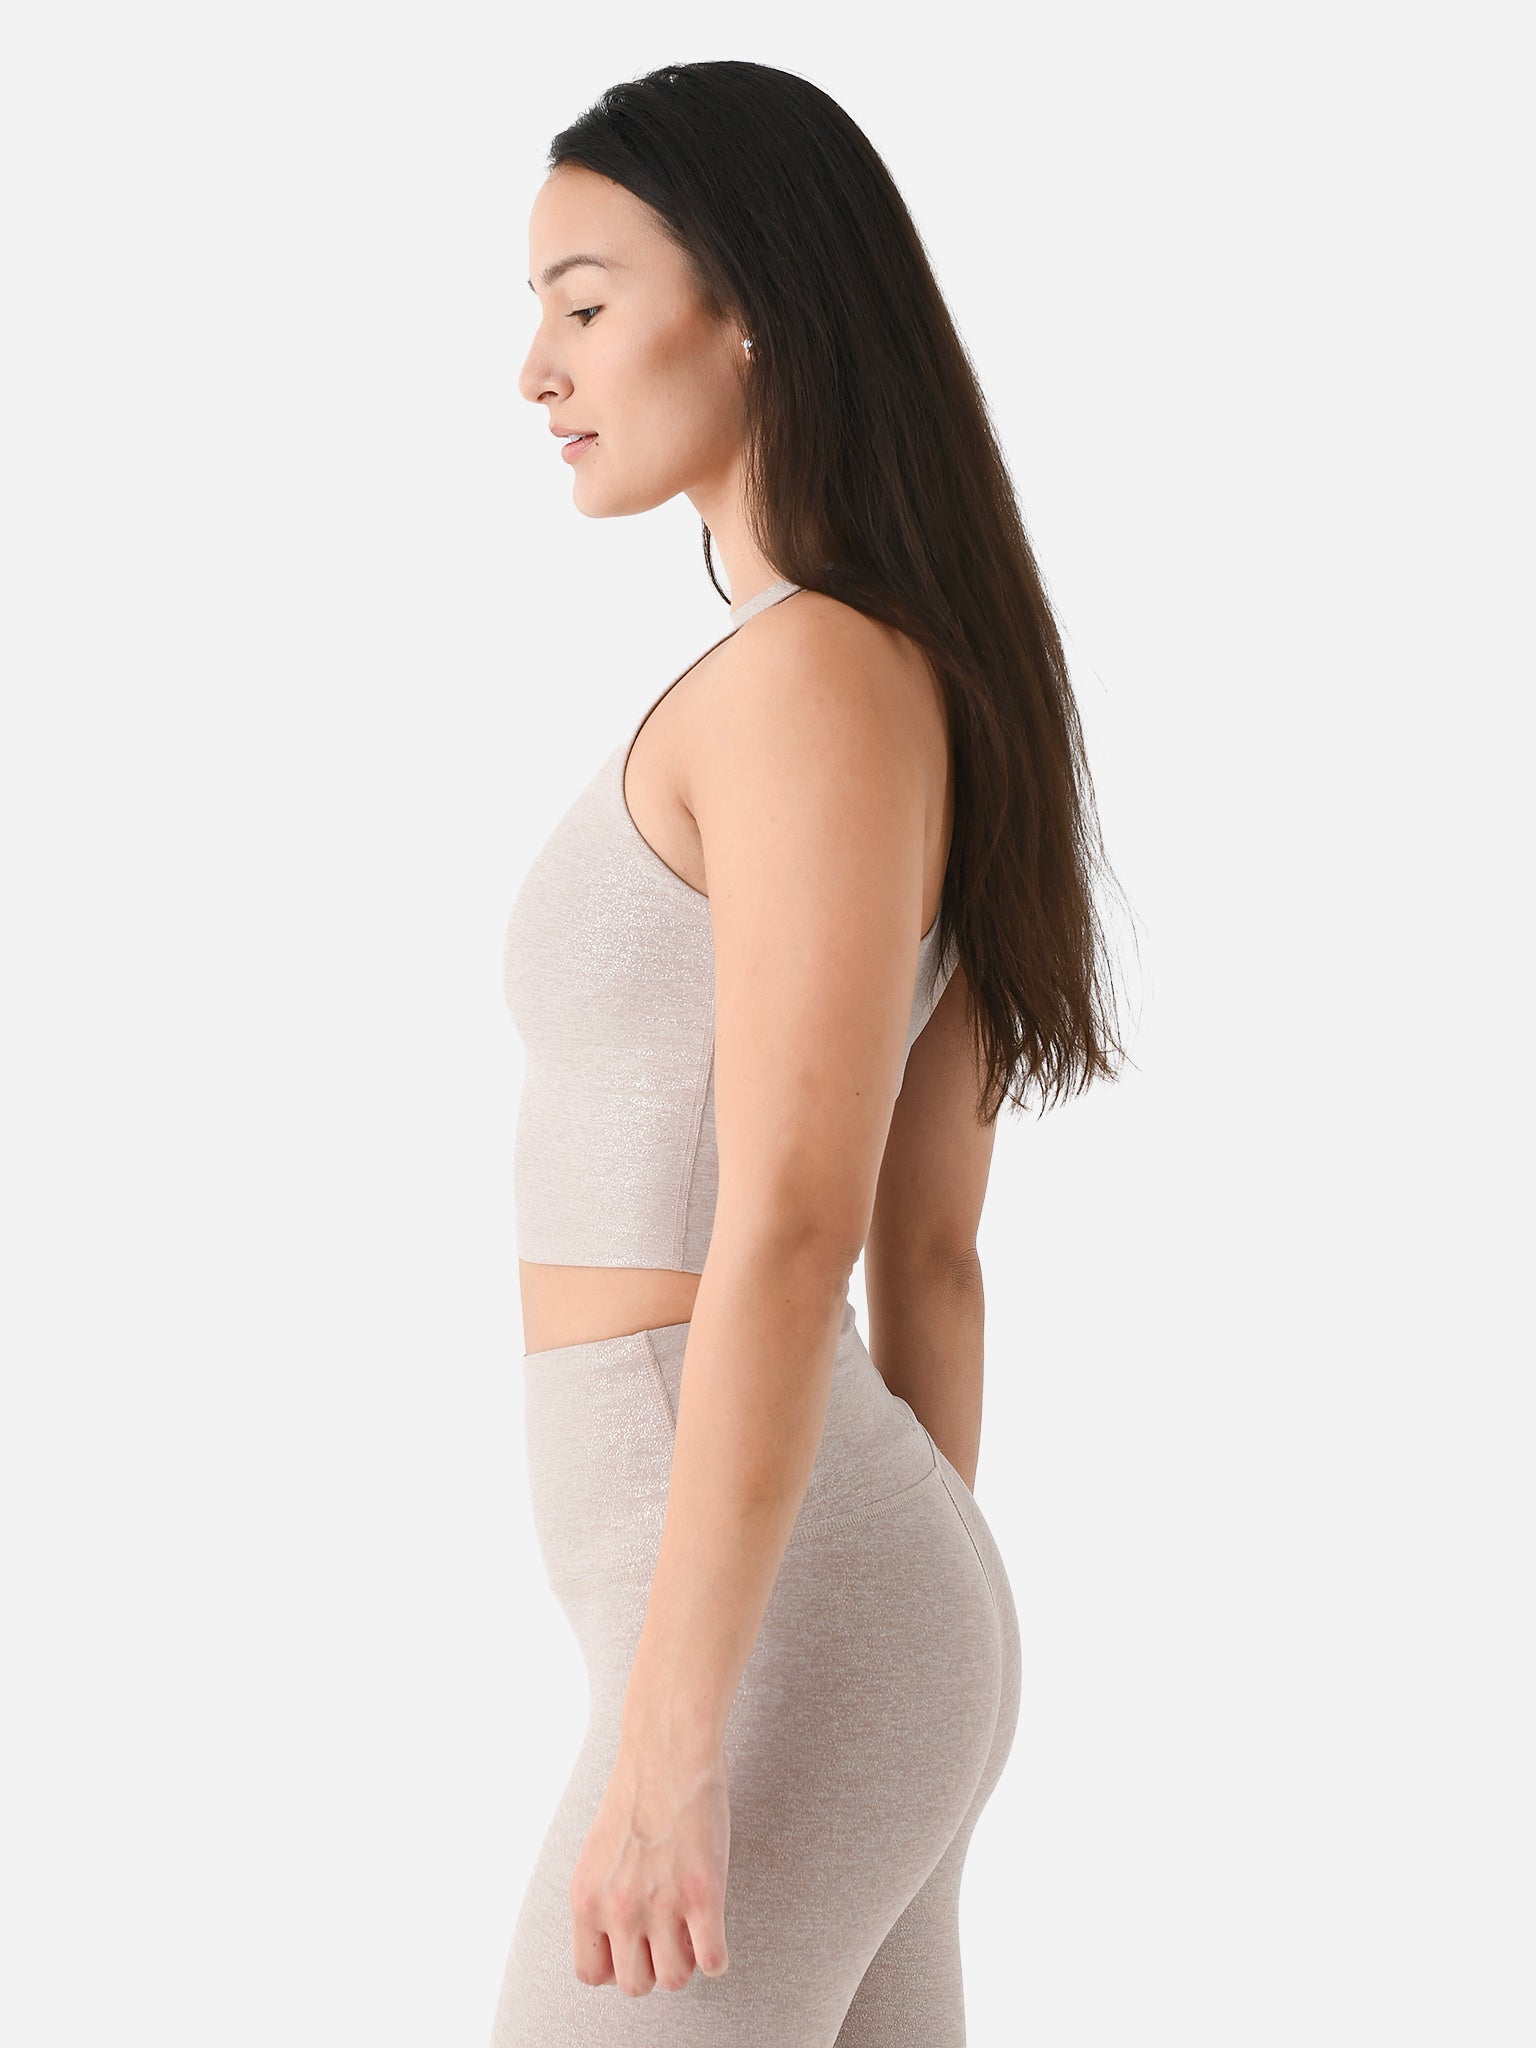  Beyond Yoga Women's Spacedye New Moves High Waisted